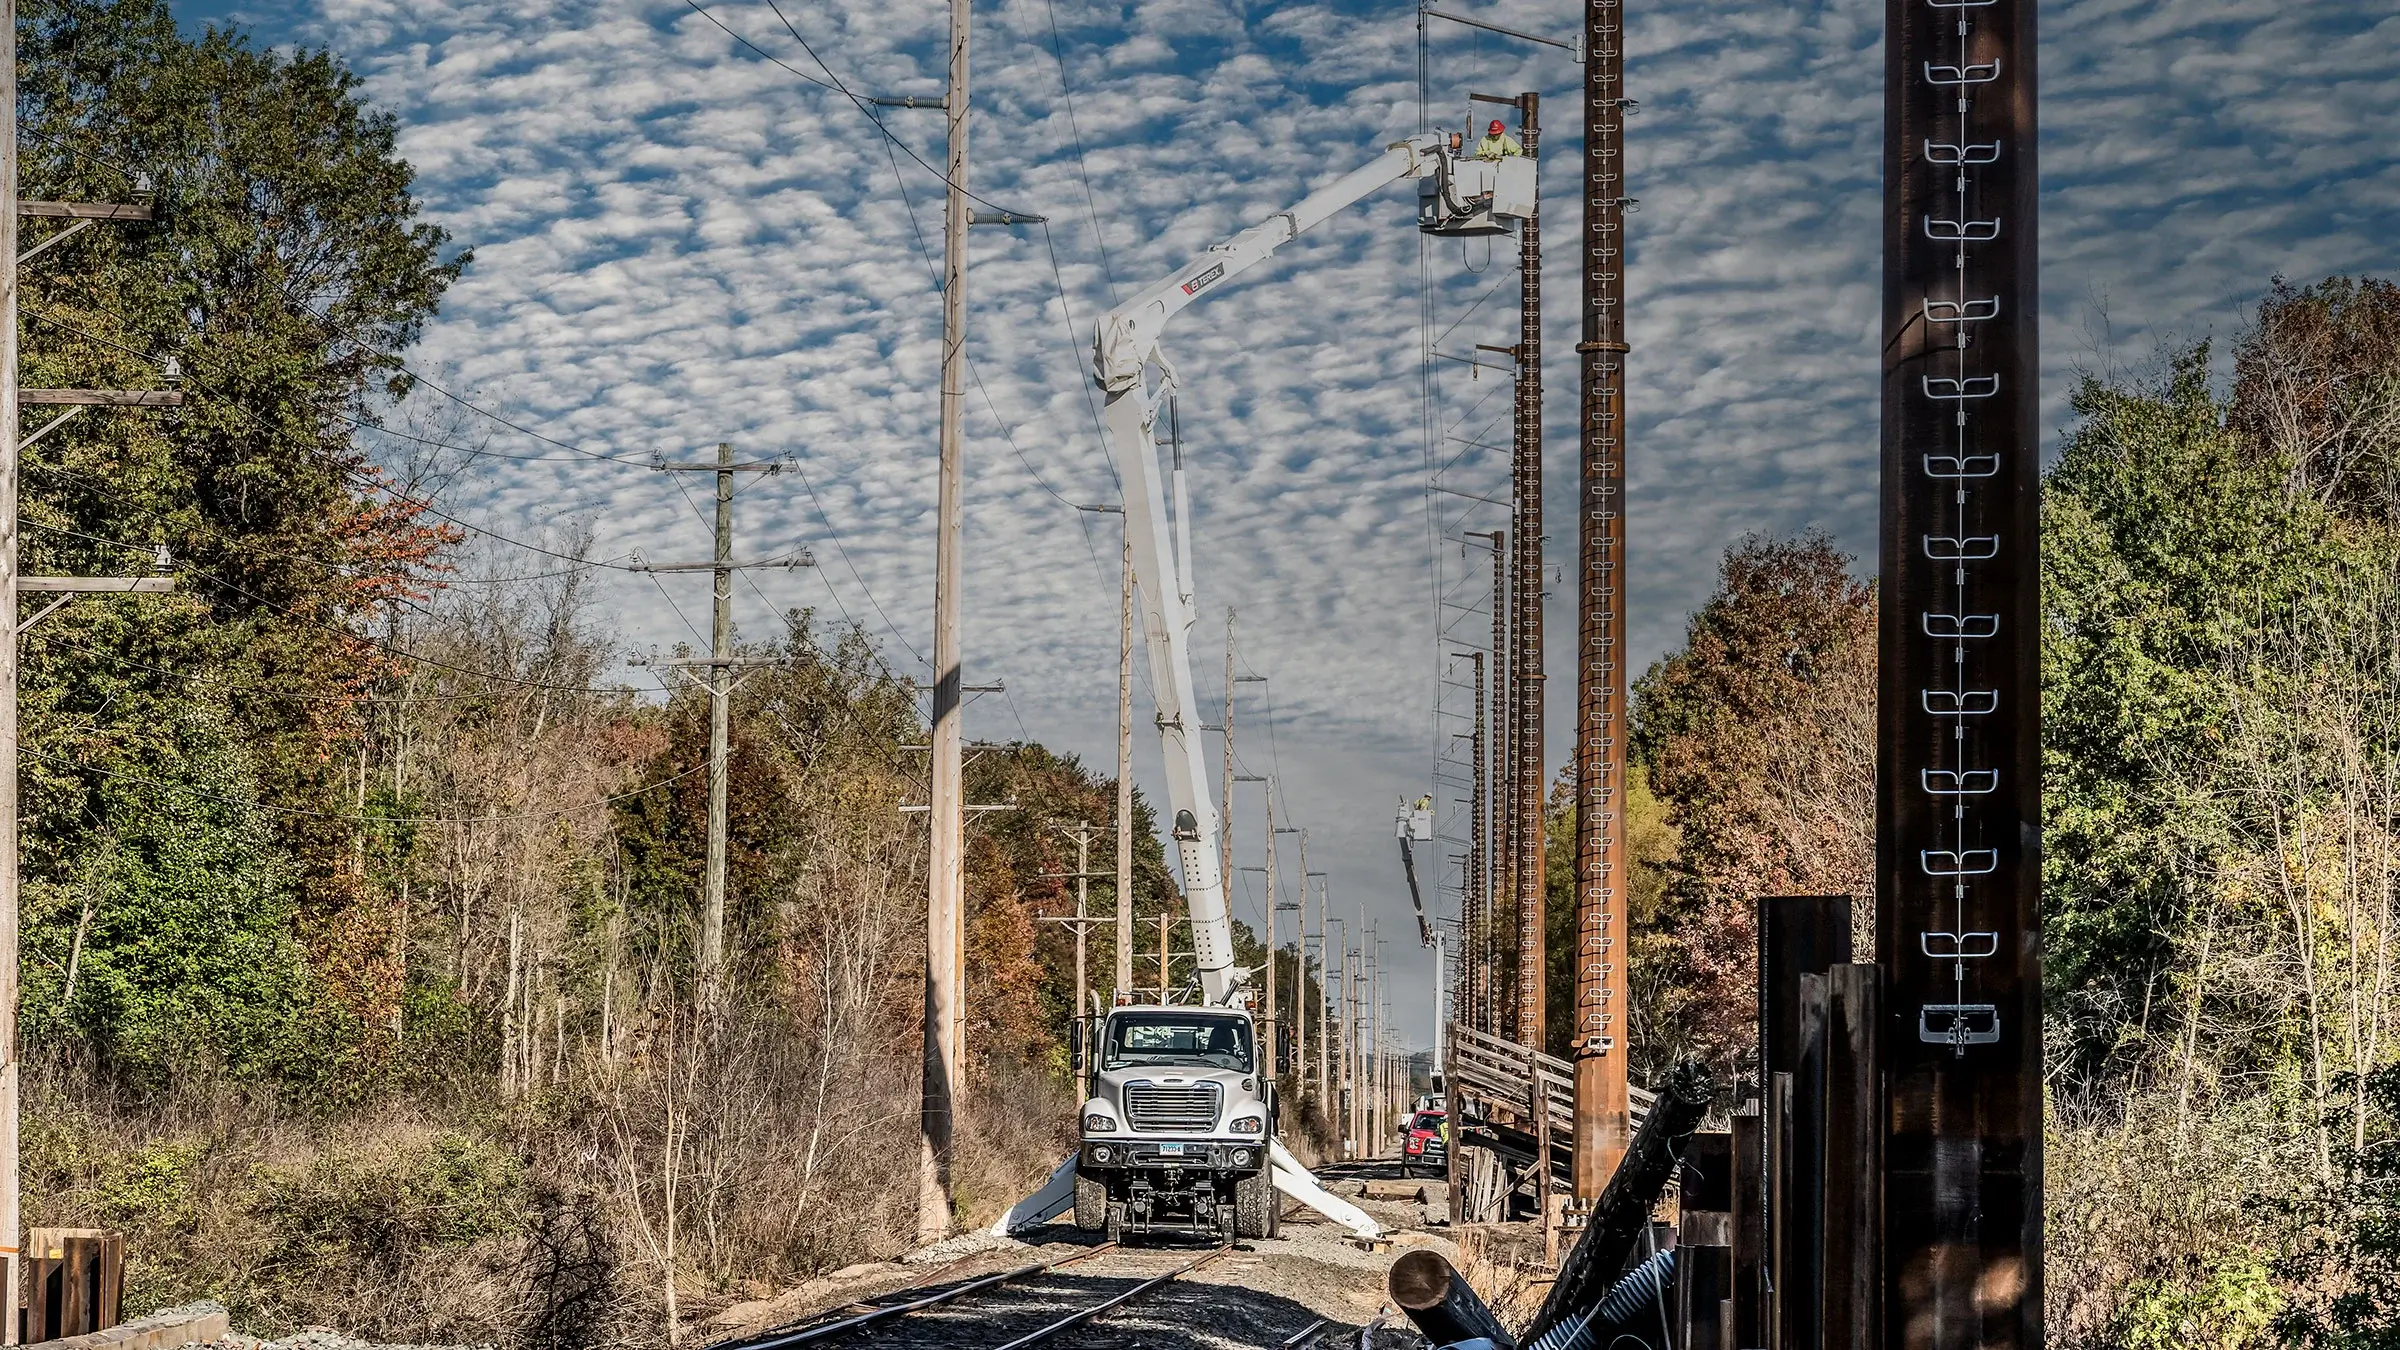 A crew works on hi-rail equipment to build a power line next to railroad tracks